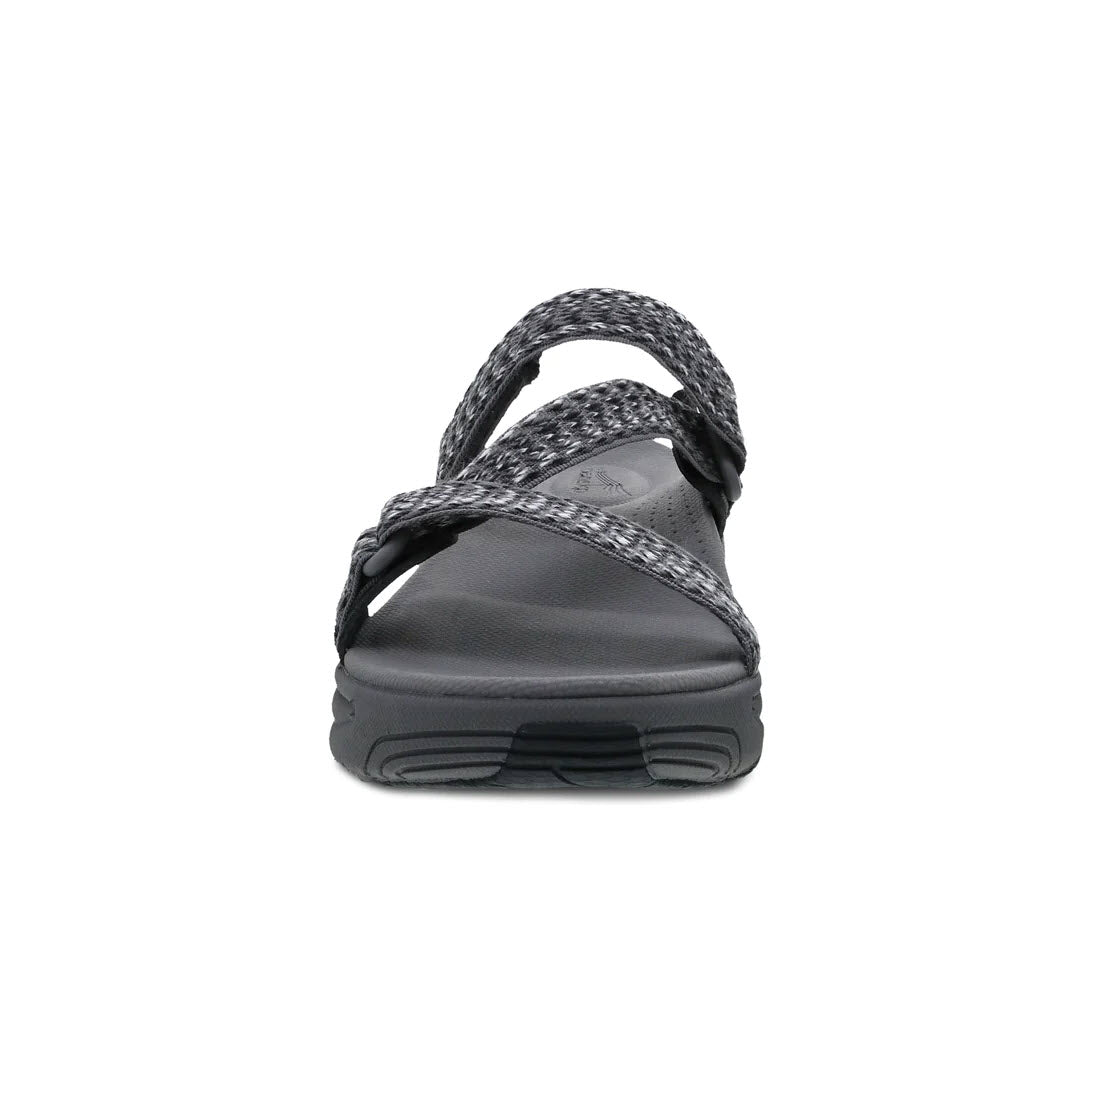 A single Dansko Rosette Grey Multi slide sandal with intricate braided straps and a thick sole, photographed against a white background.